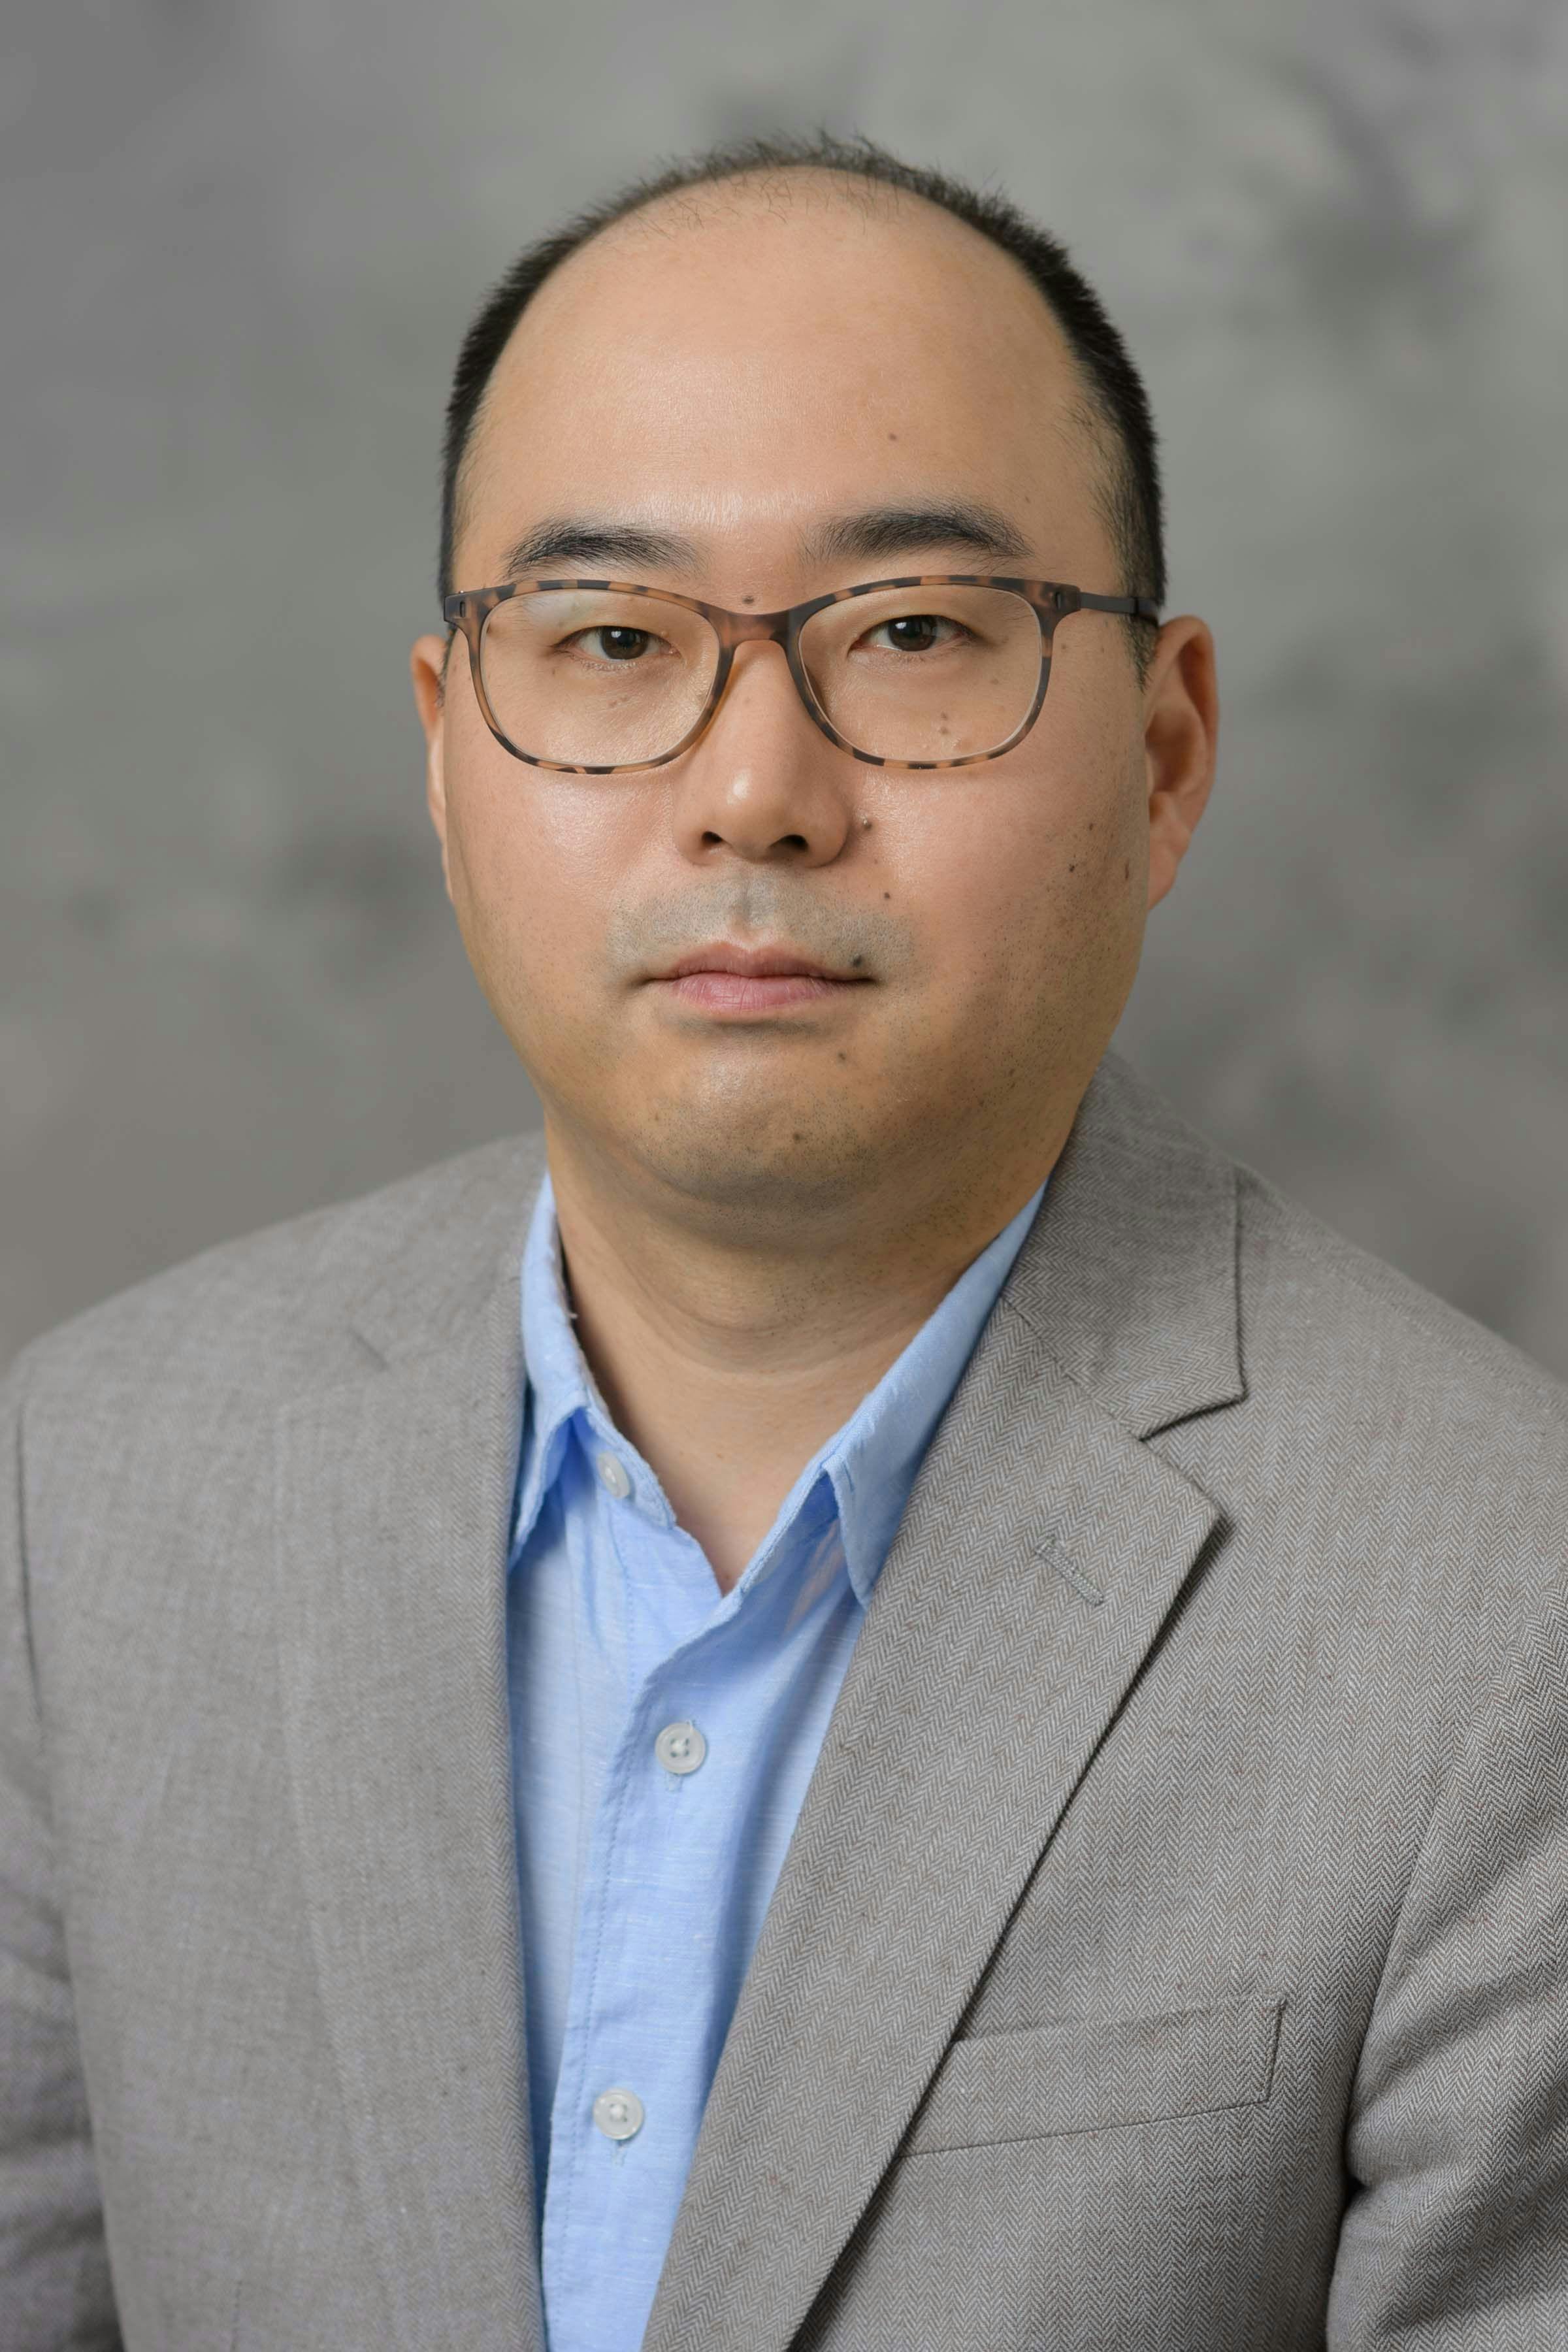 Young L. Kim, Ph.D., of Purdue University, has developed an app that uses a smartphone camera to measure hemoglobin levels.